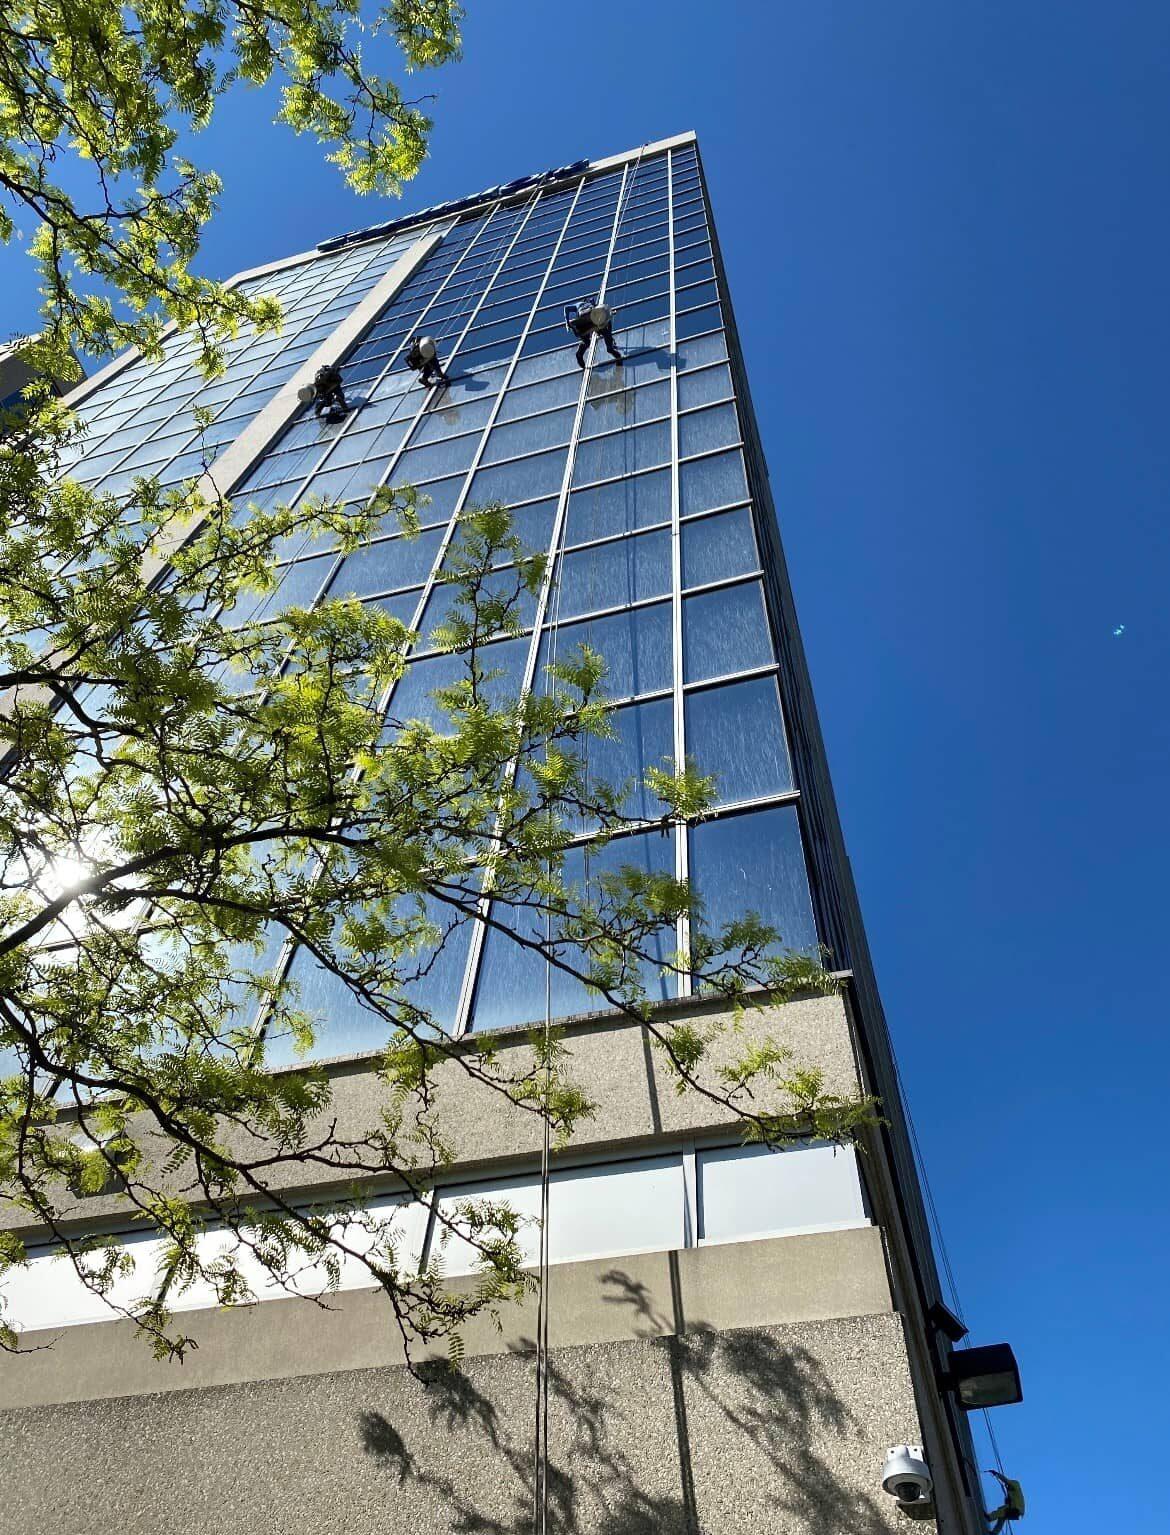 A picture of a skyscraper, taken from the ground looking up. There are three people window cleaning on the side of the building attached by ropes.